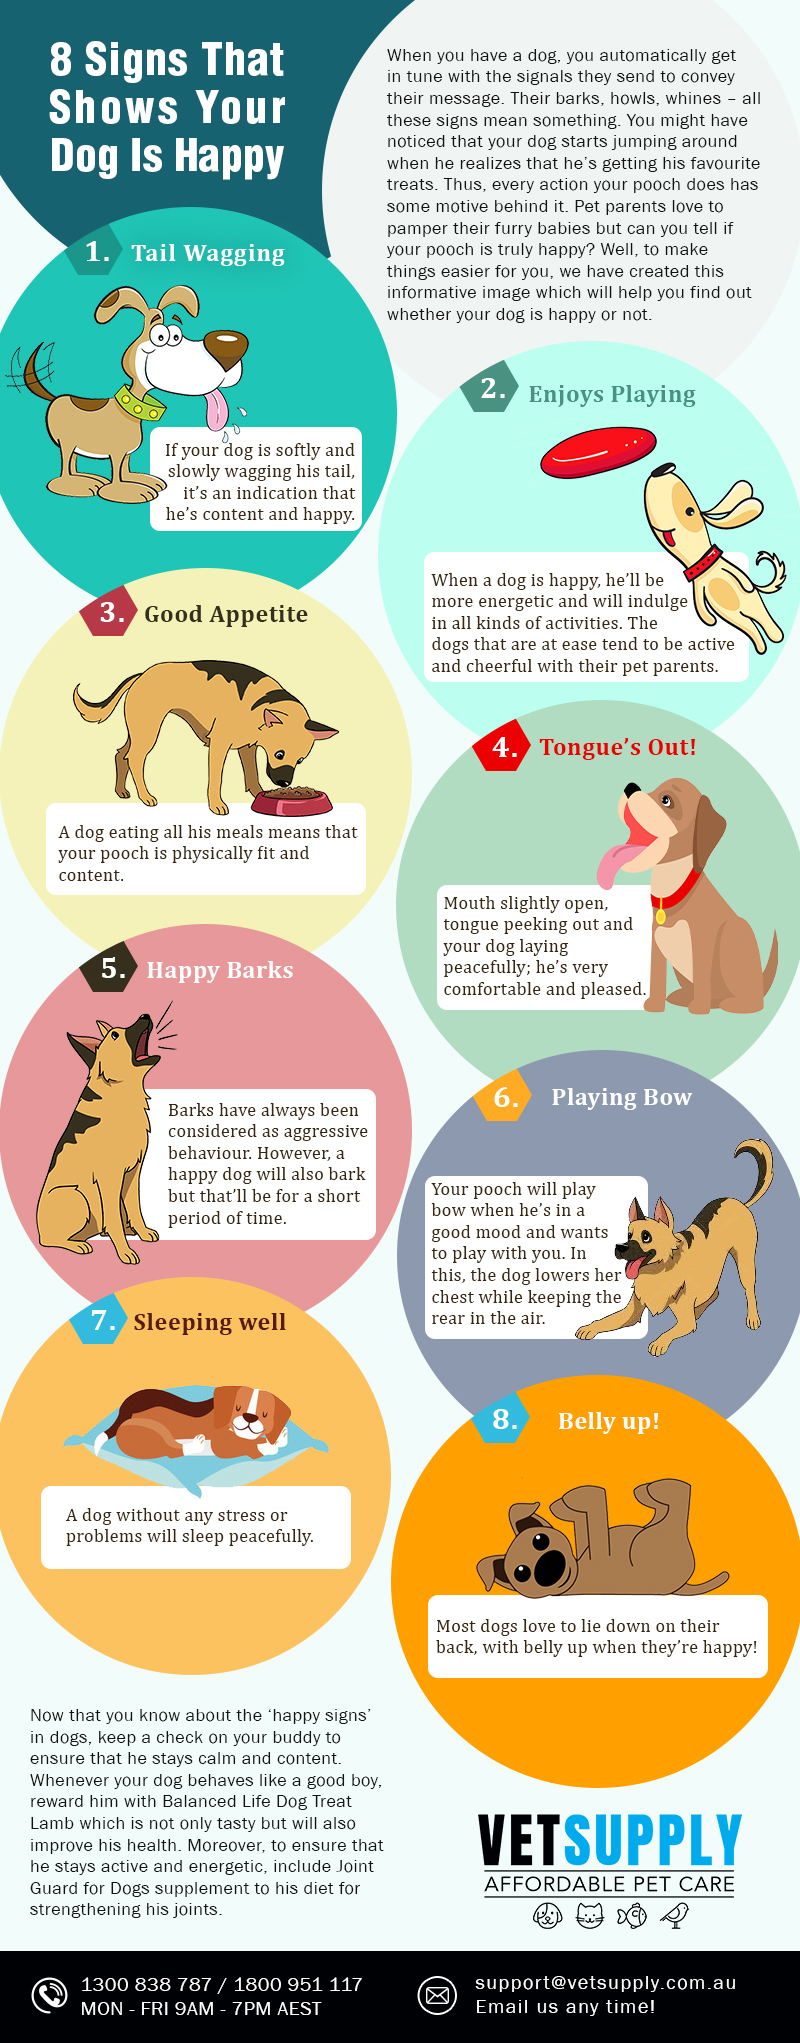 Top 5 Signs That Your Dog is Happy  